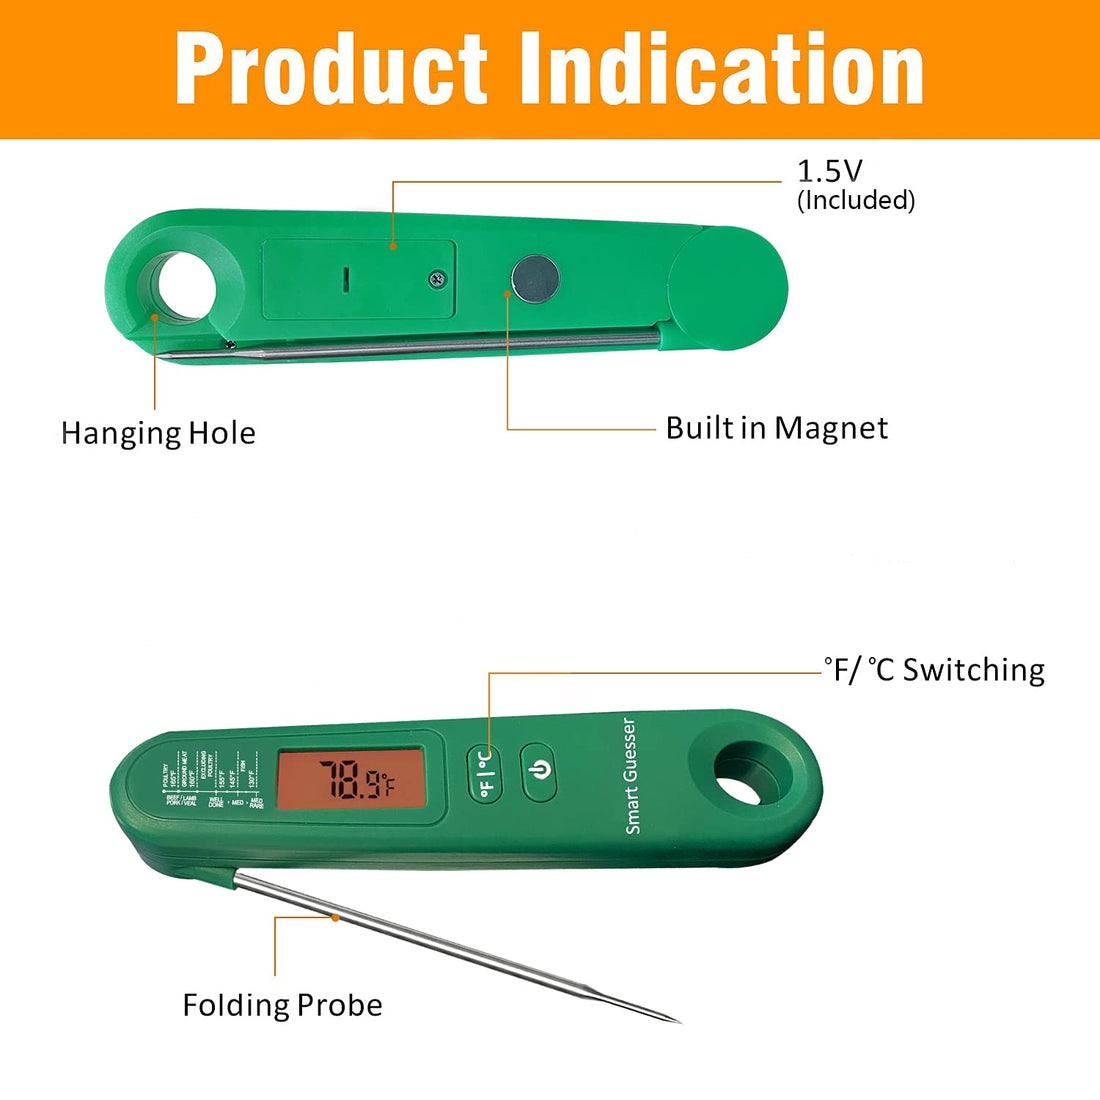 Smart Guesser Digital Meat Thermometer with Backlight for Kitchen Cooking-Instant Read Food Thermometer for Meat, Deep Frying, Baking,Grilling BBQ-Green, (UIE-OT-105)